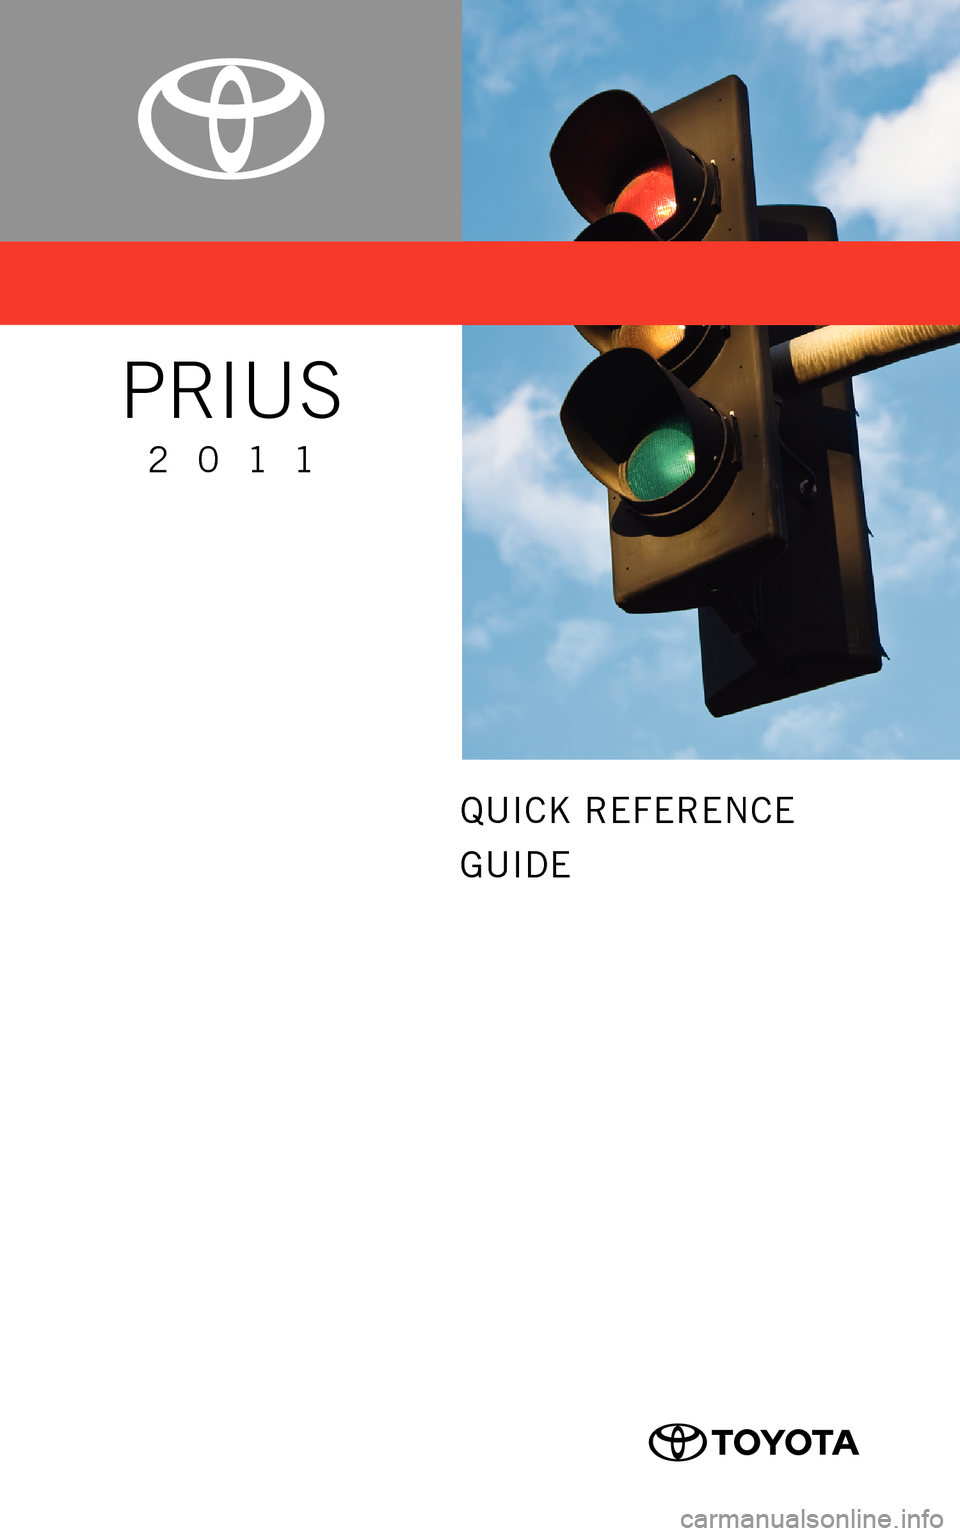 TOYOTA PRIUS 2011 3.G Quick Reference Guide QUICK REFERENCE 
GUIDE
PRIUS
2011
BCFC_123161M1    1
BCFC_123161M1   1 11/3/10   6:22 AM
11/3/10   6:22 AM 